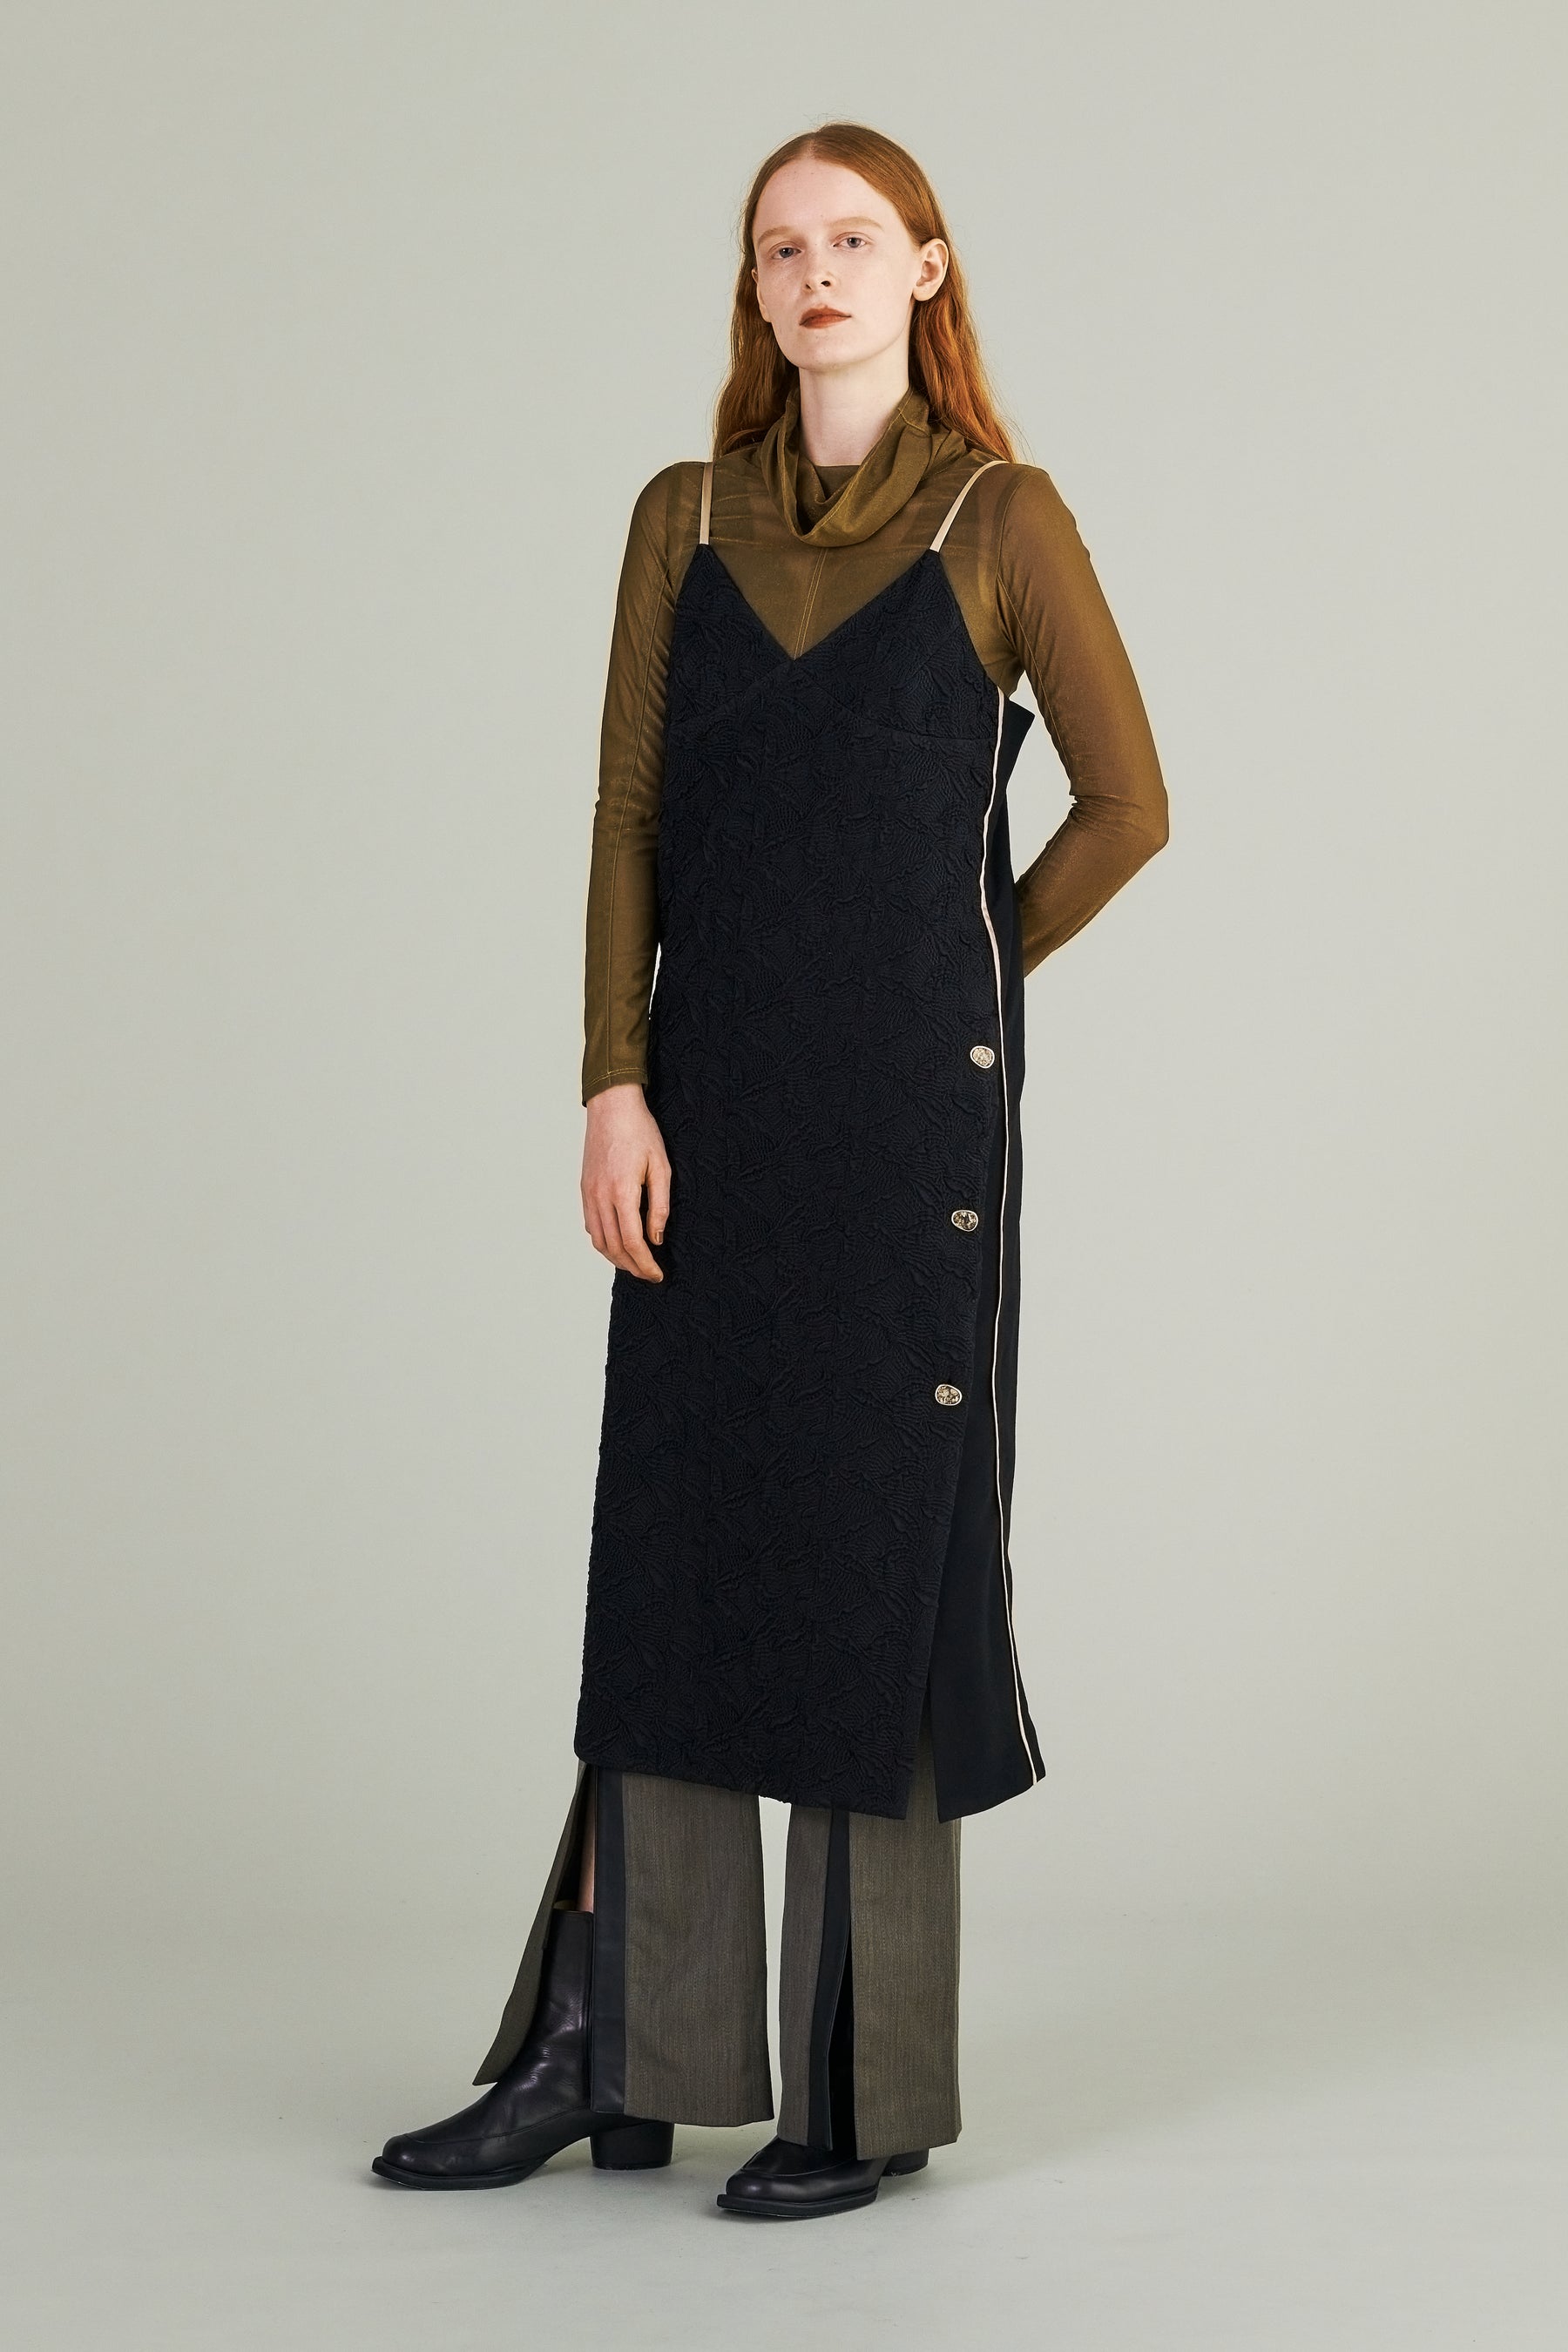 maさま専用】MURRAL Thawing embroidery dress-